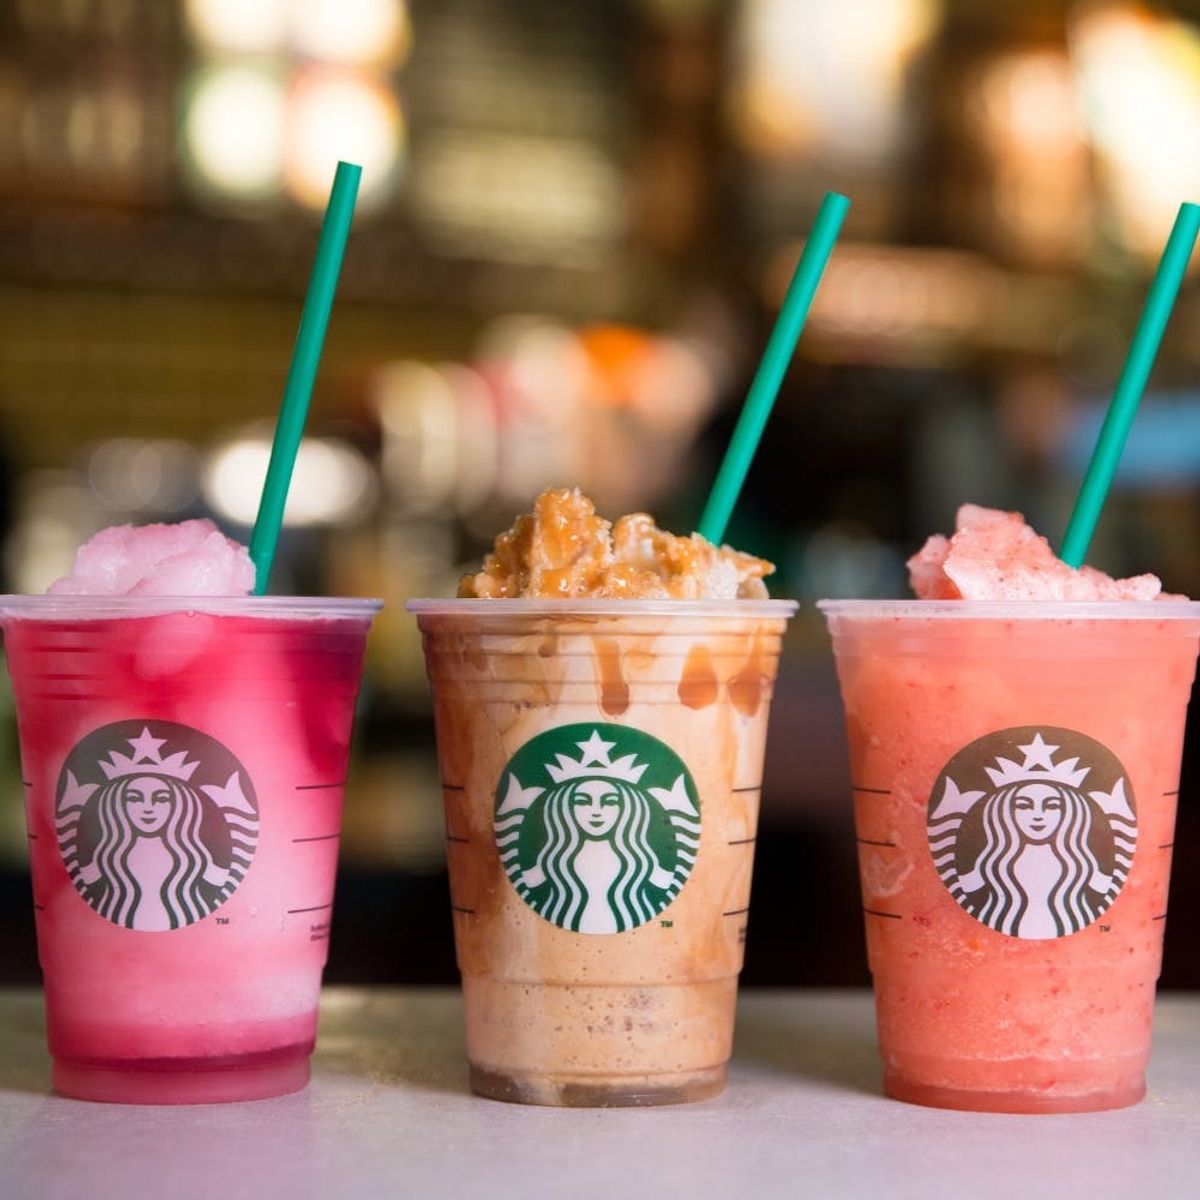 Whoa: You Can Win Free Starbucks Drinks FOR LIFE